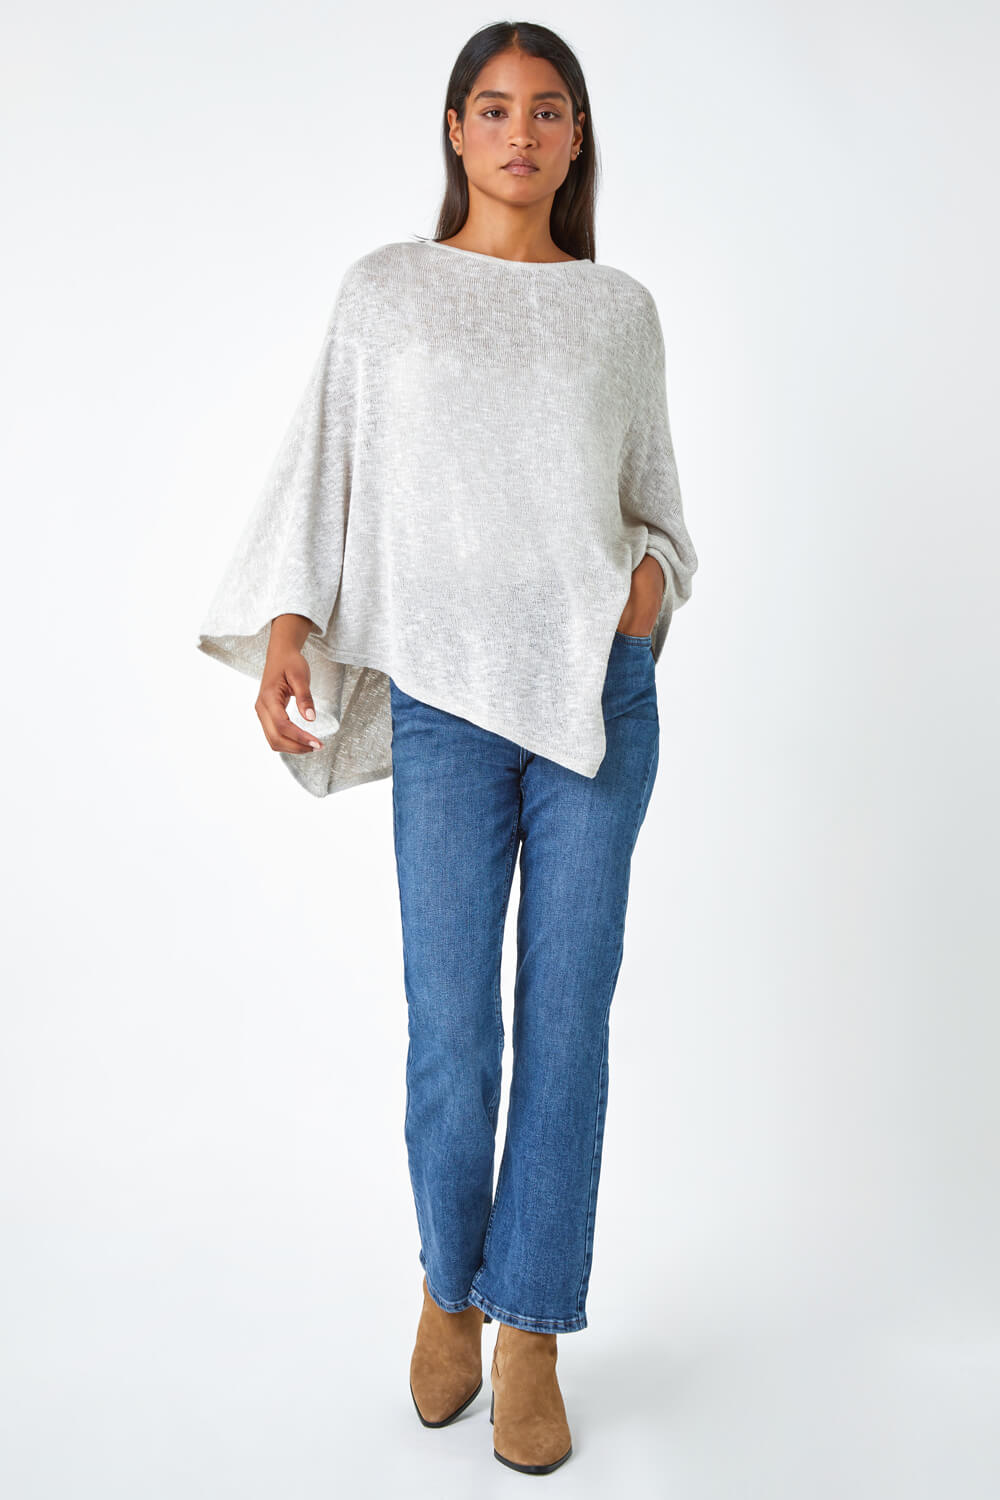 Stone Marl Stretch Knit Jersey Top, Image 2 of 5